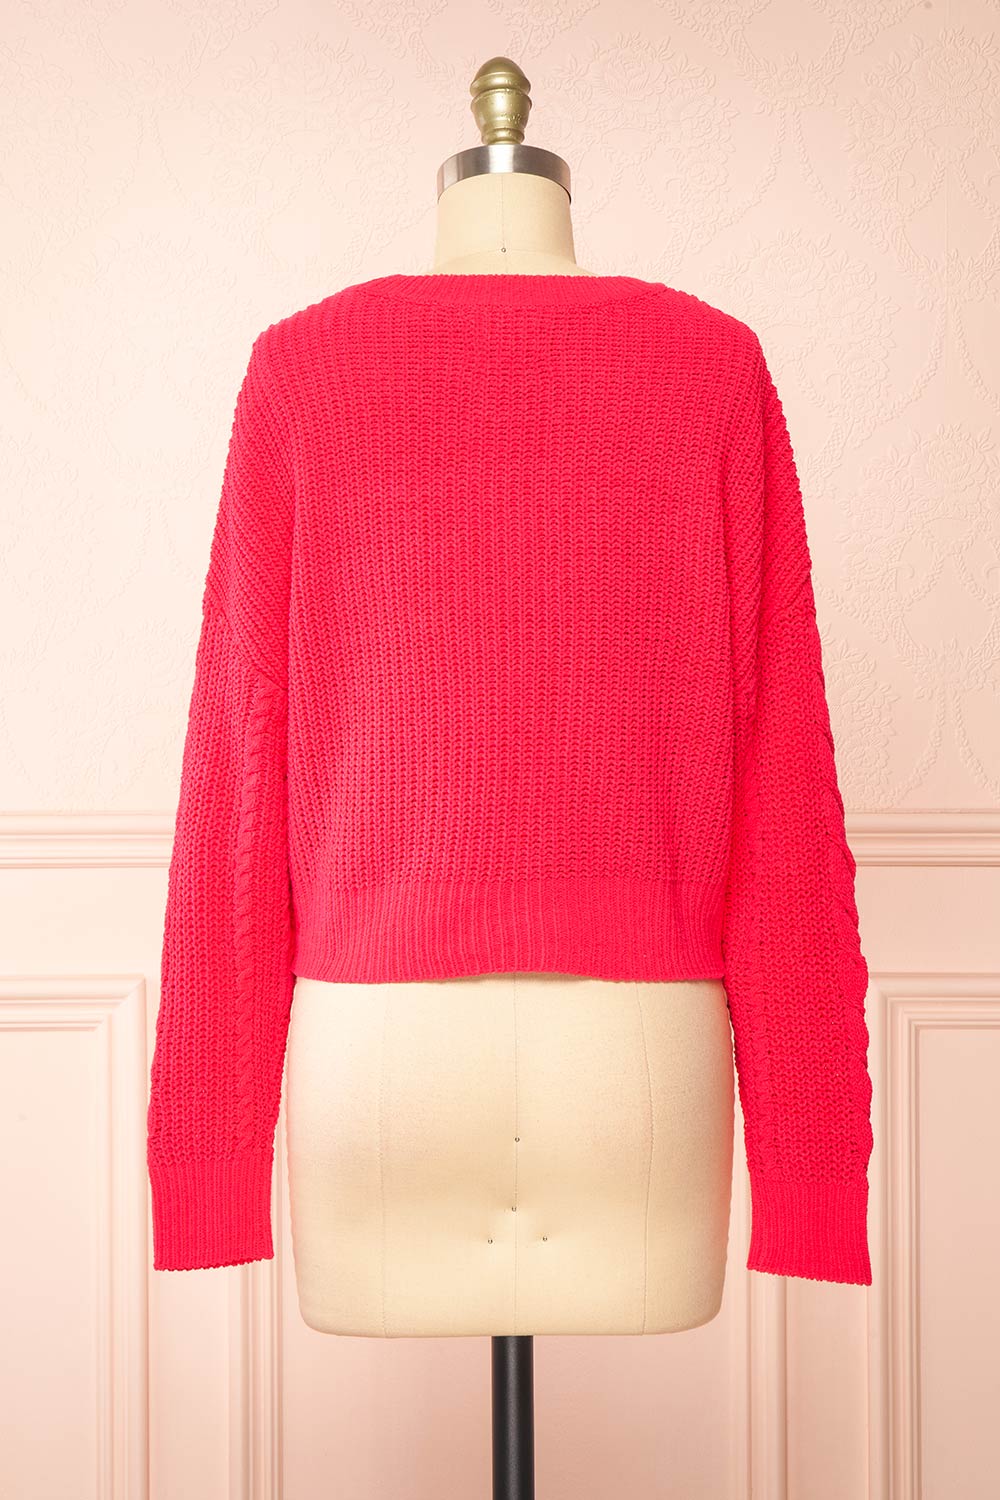 Madeleine Pink Cropped Cable Knit Sweater | Boutique 1861 back view